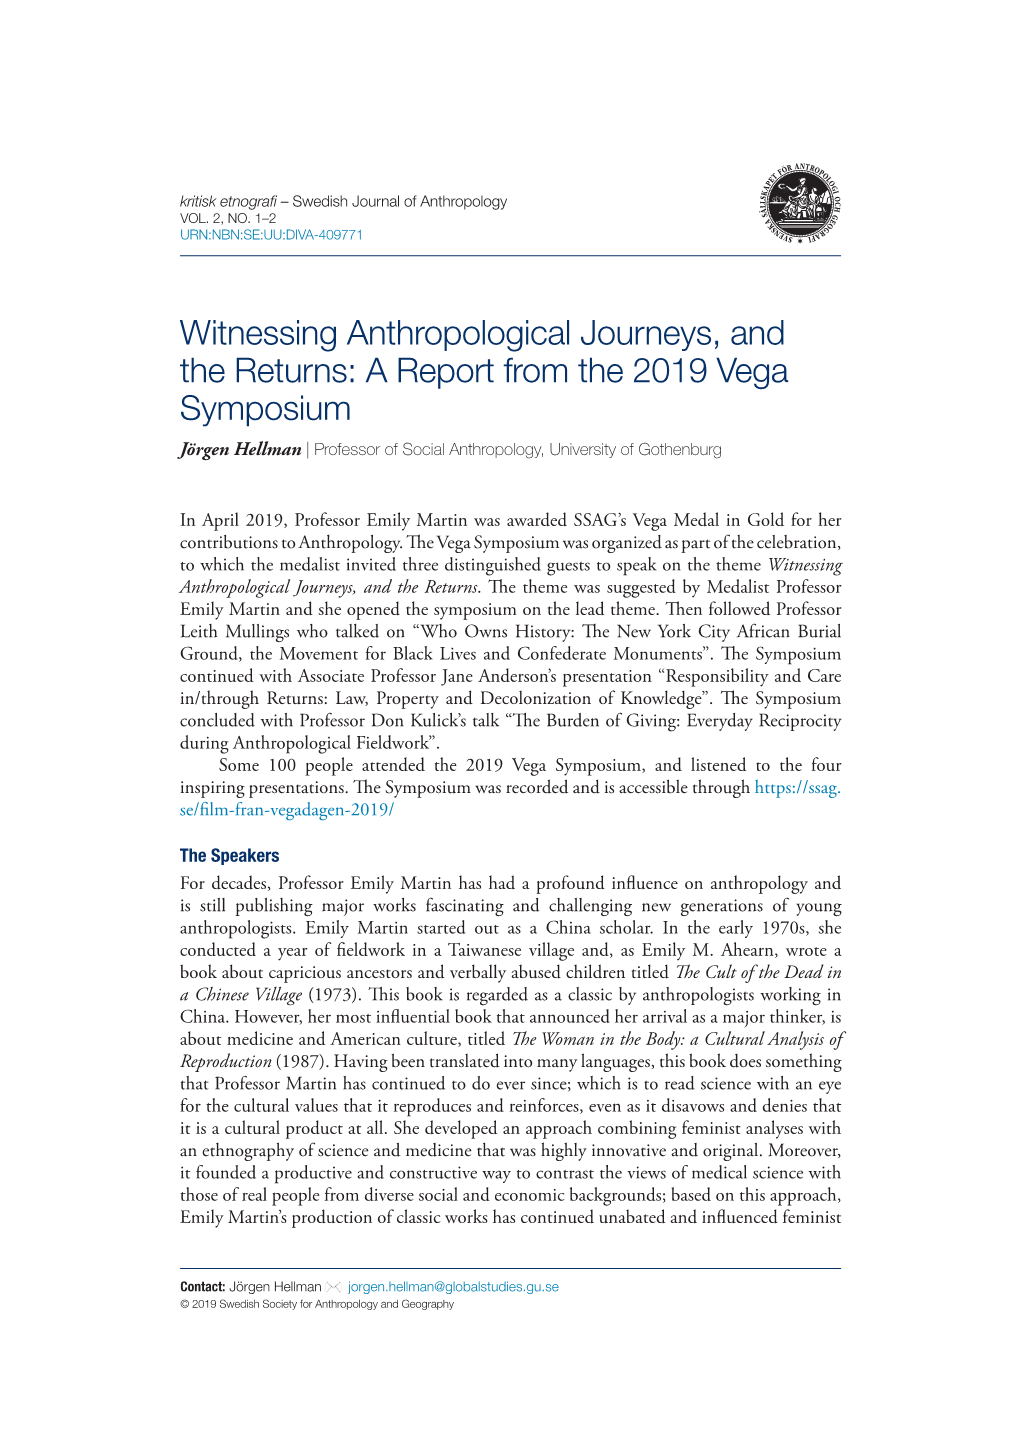 Witnessing Anthropological Journeys, and the Returns: a Report from The